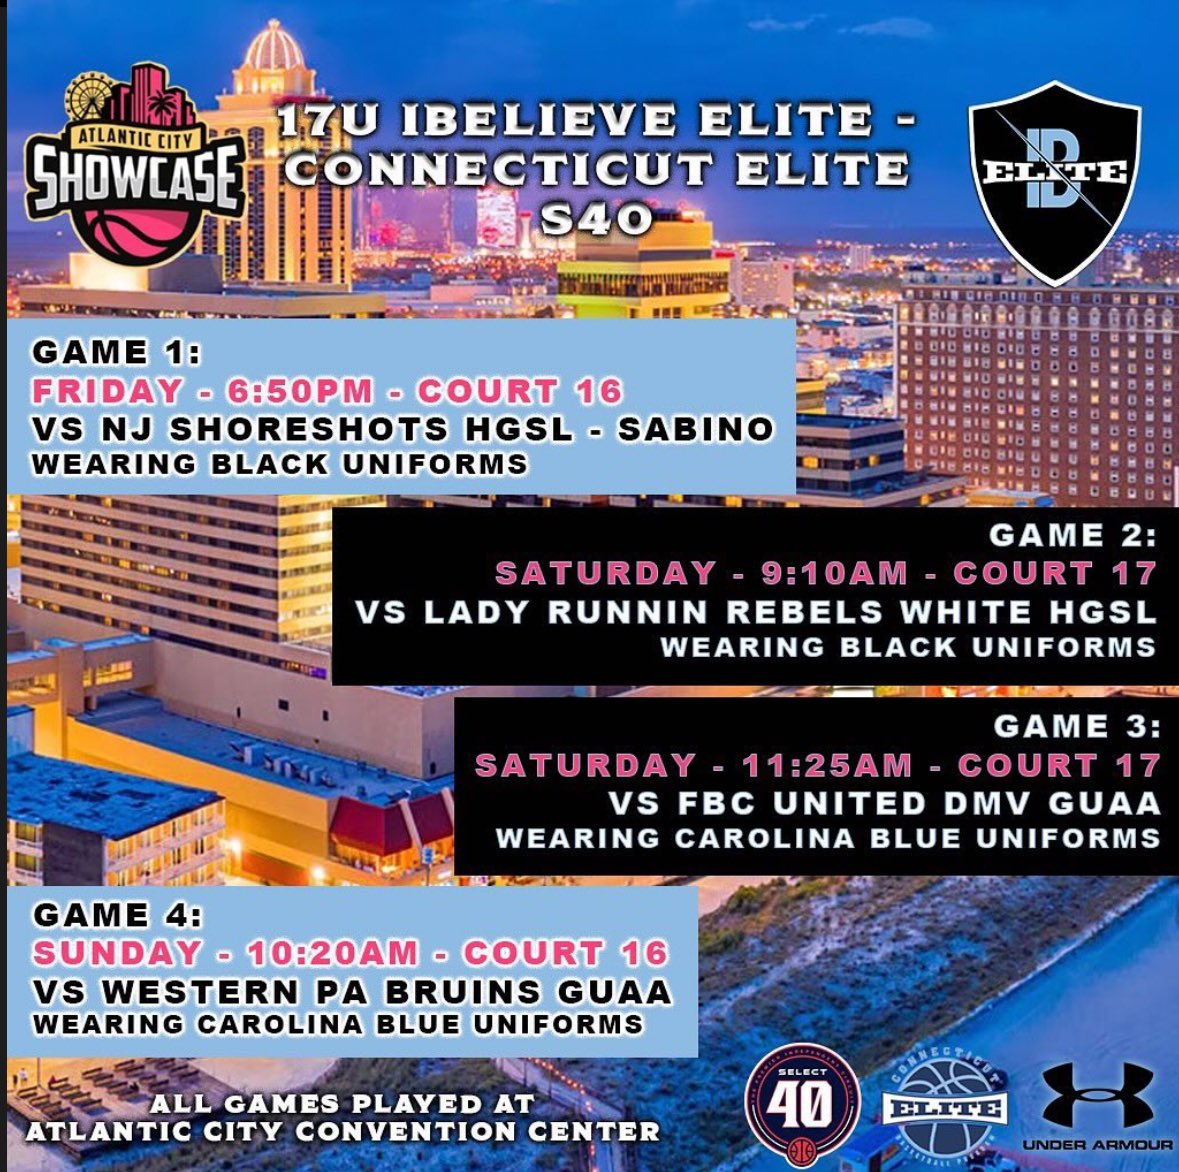 This weekend’s schedule for 📍Atlantic City Showcase!! Can’t wait to compete with my team VS some great competition in the Select 40!! @ibelieve_elite @SelectEventsBB 🔥🔥